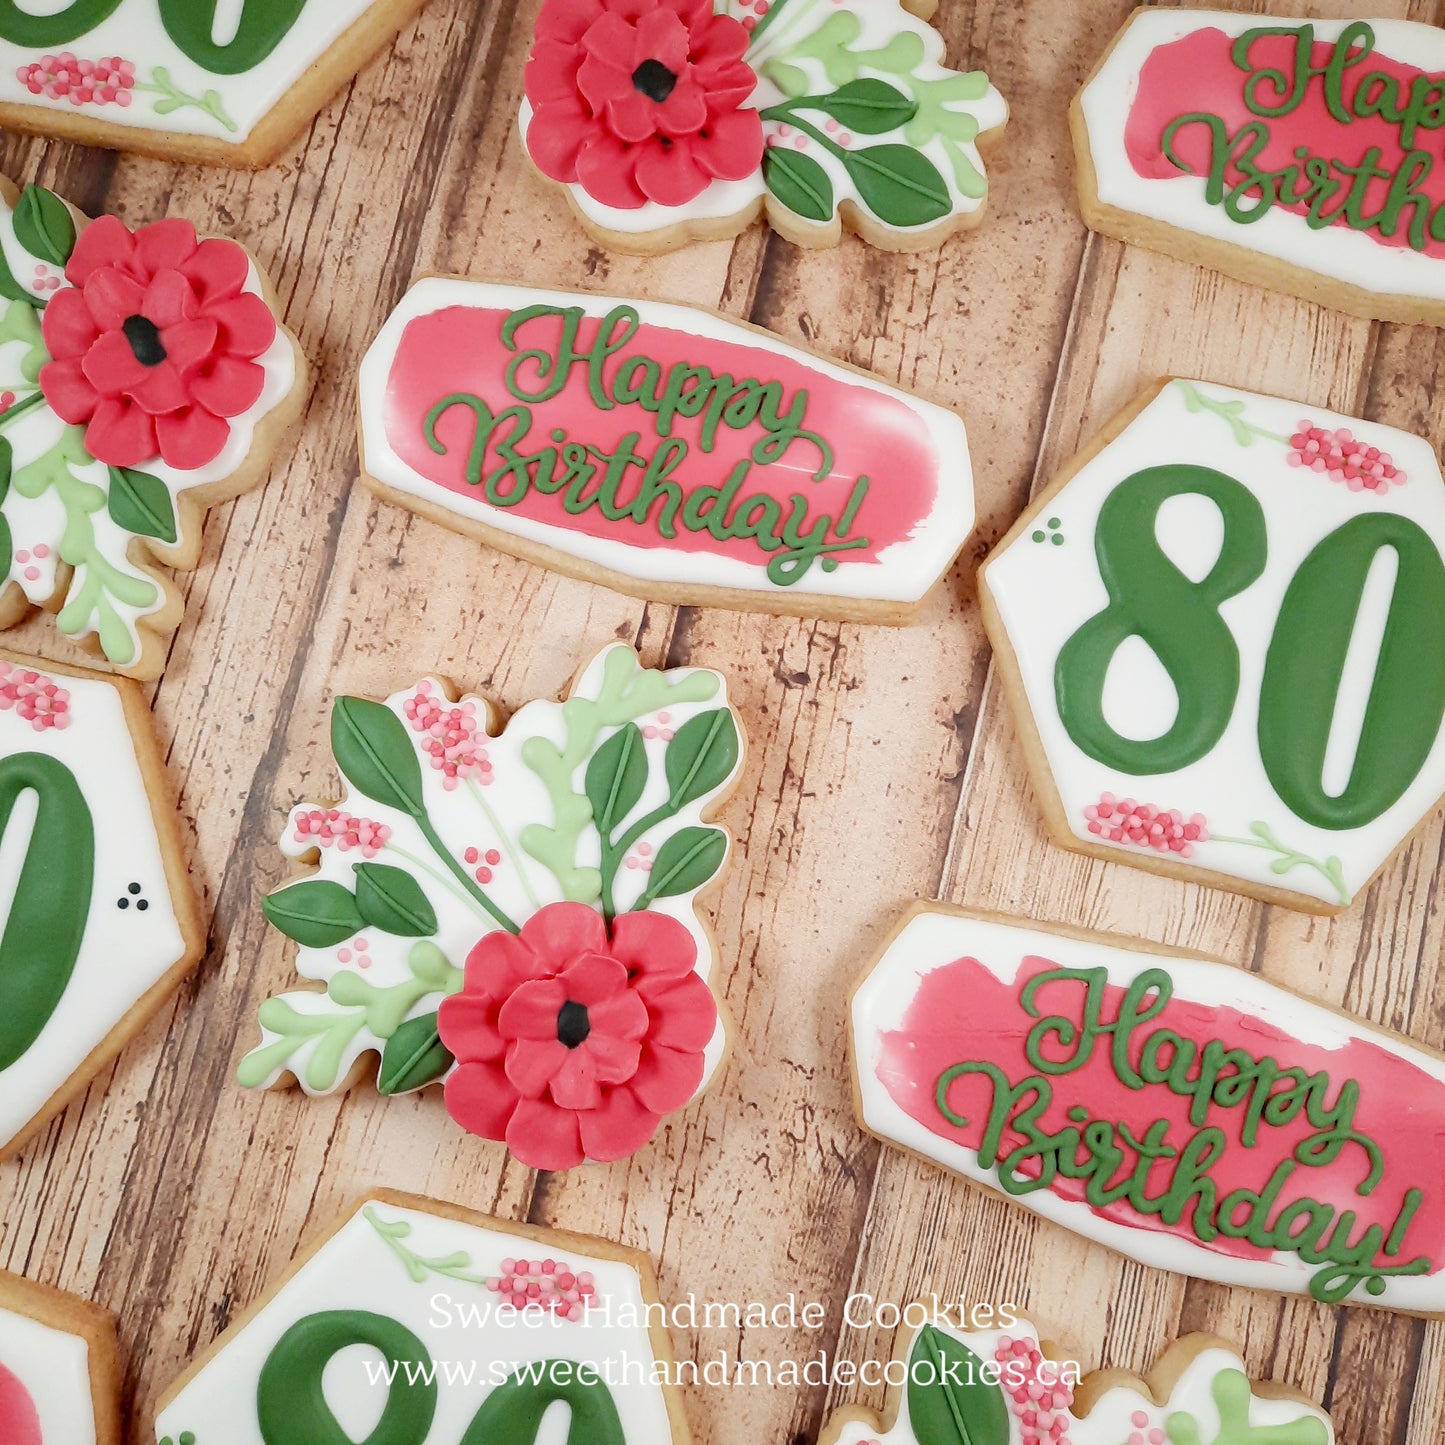 Happy Birthday Cookies for an 80th Birthday